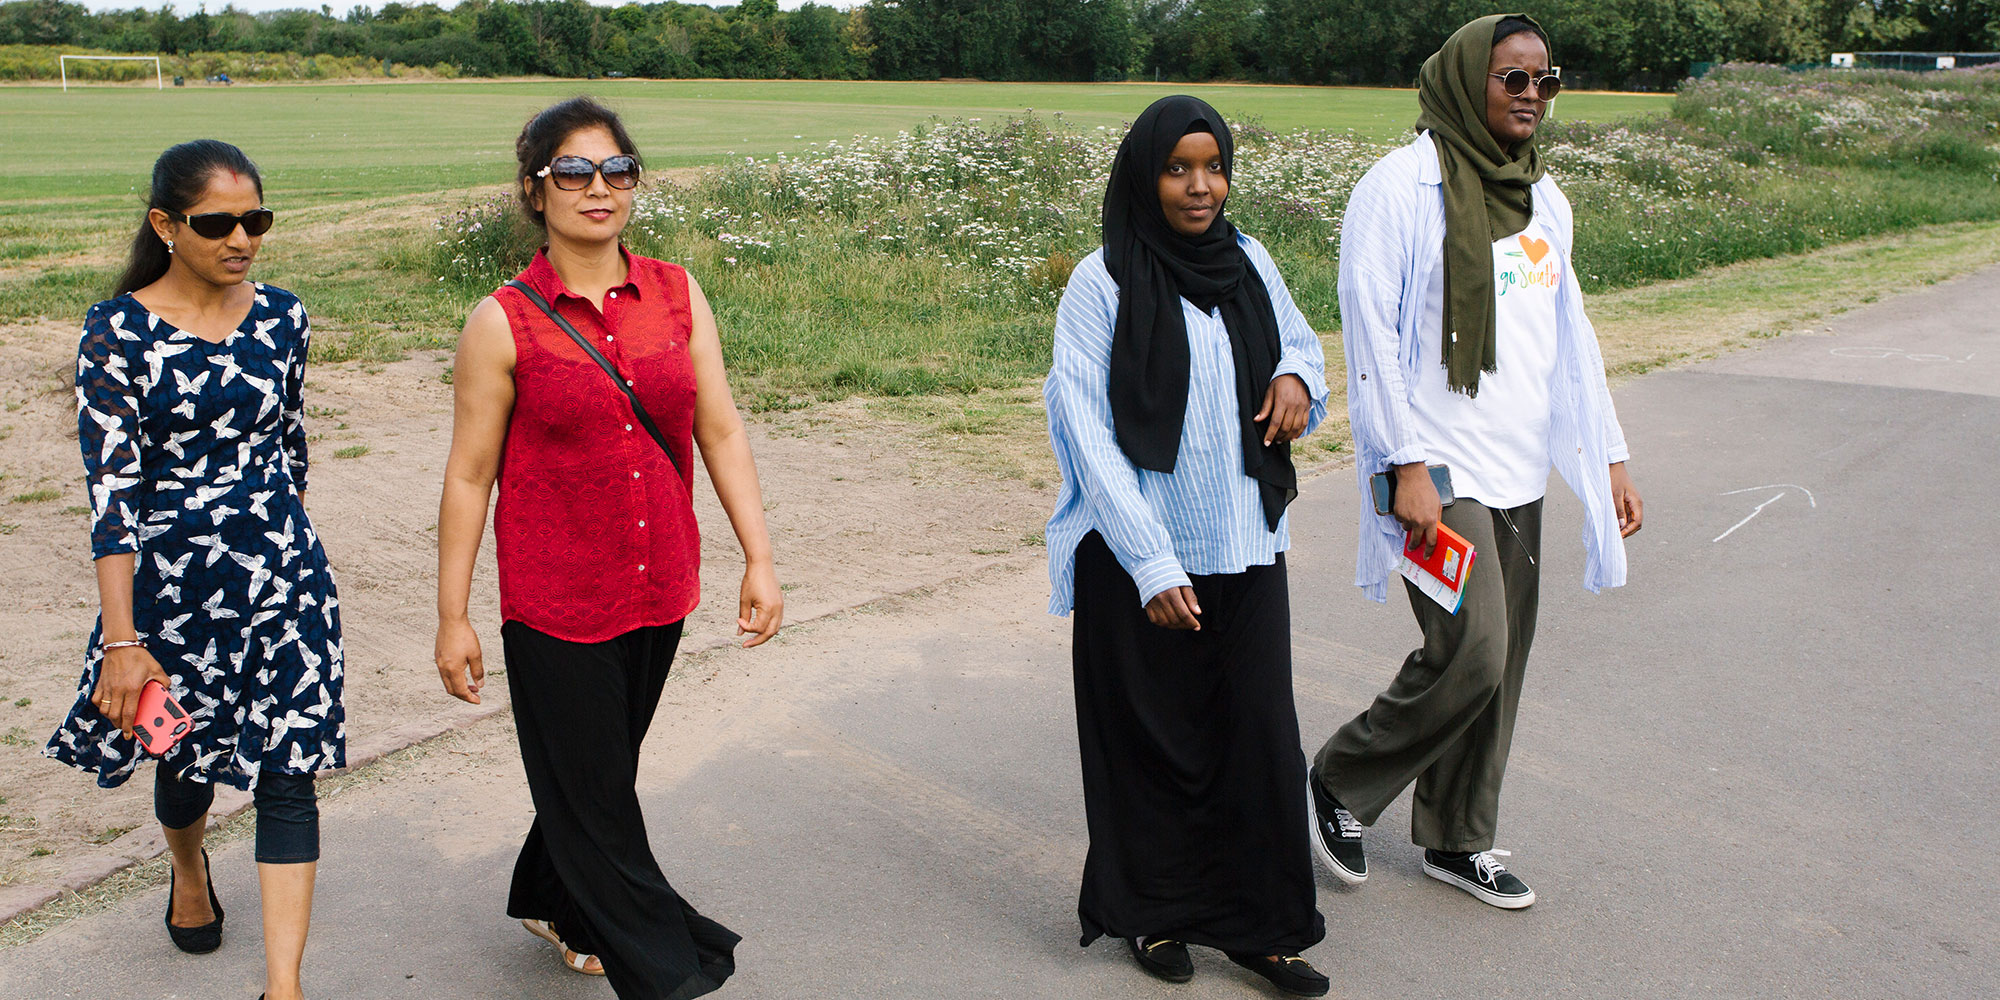 Four women from different ethnic backgrounds out walking.